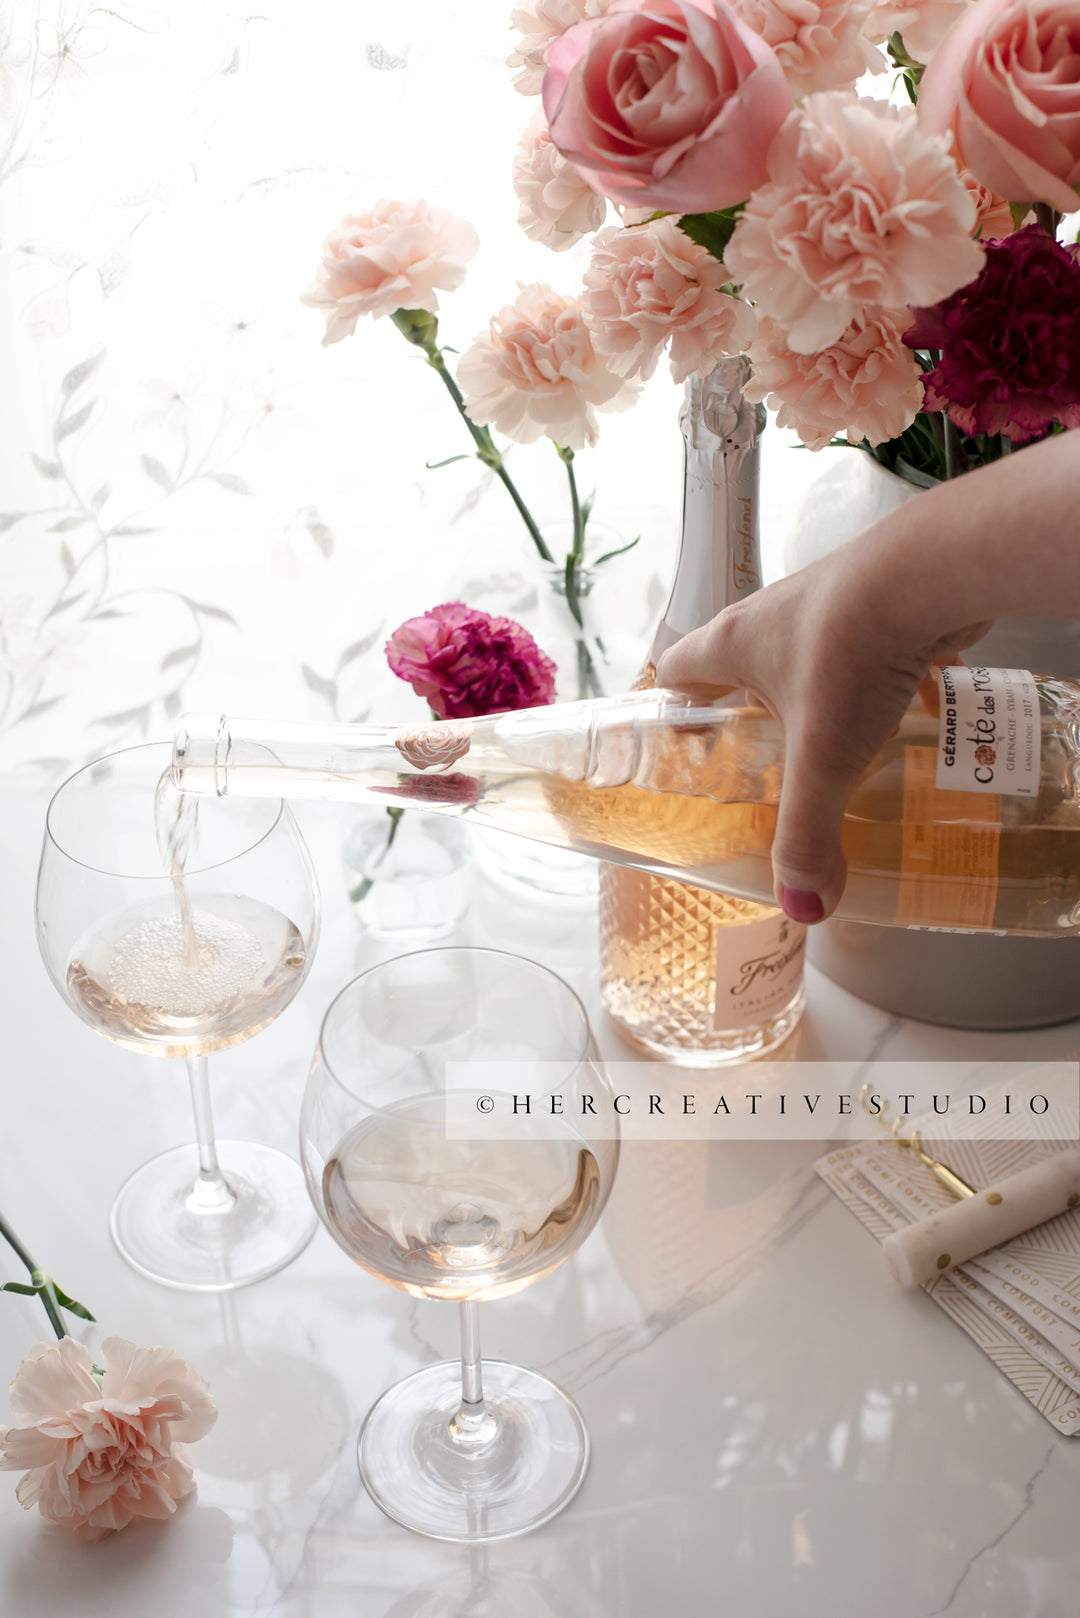 Hand Pouring Glass of Wine, Styled Image